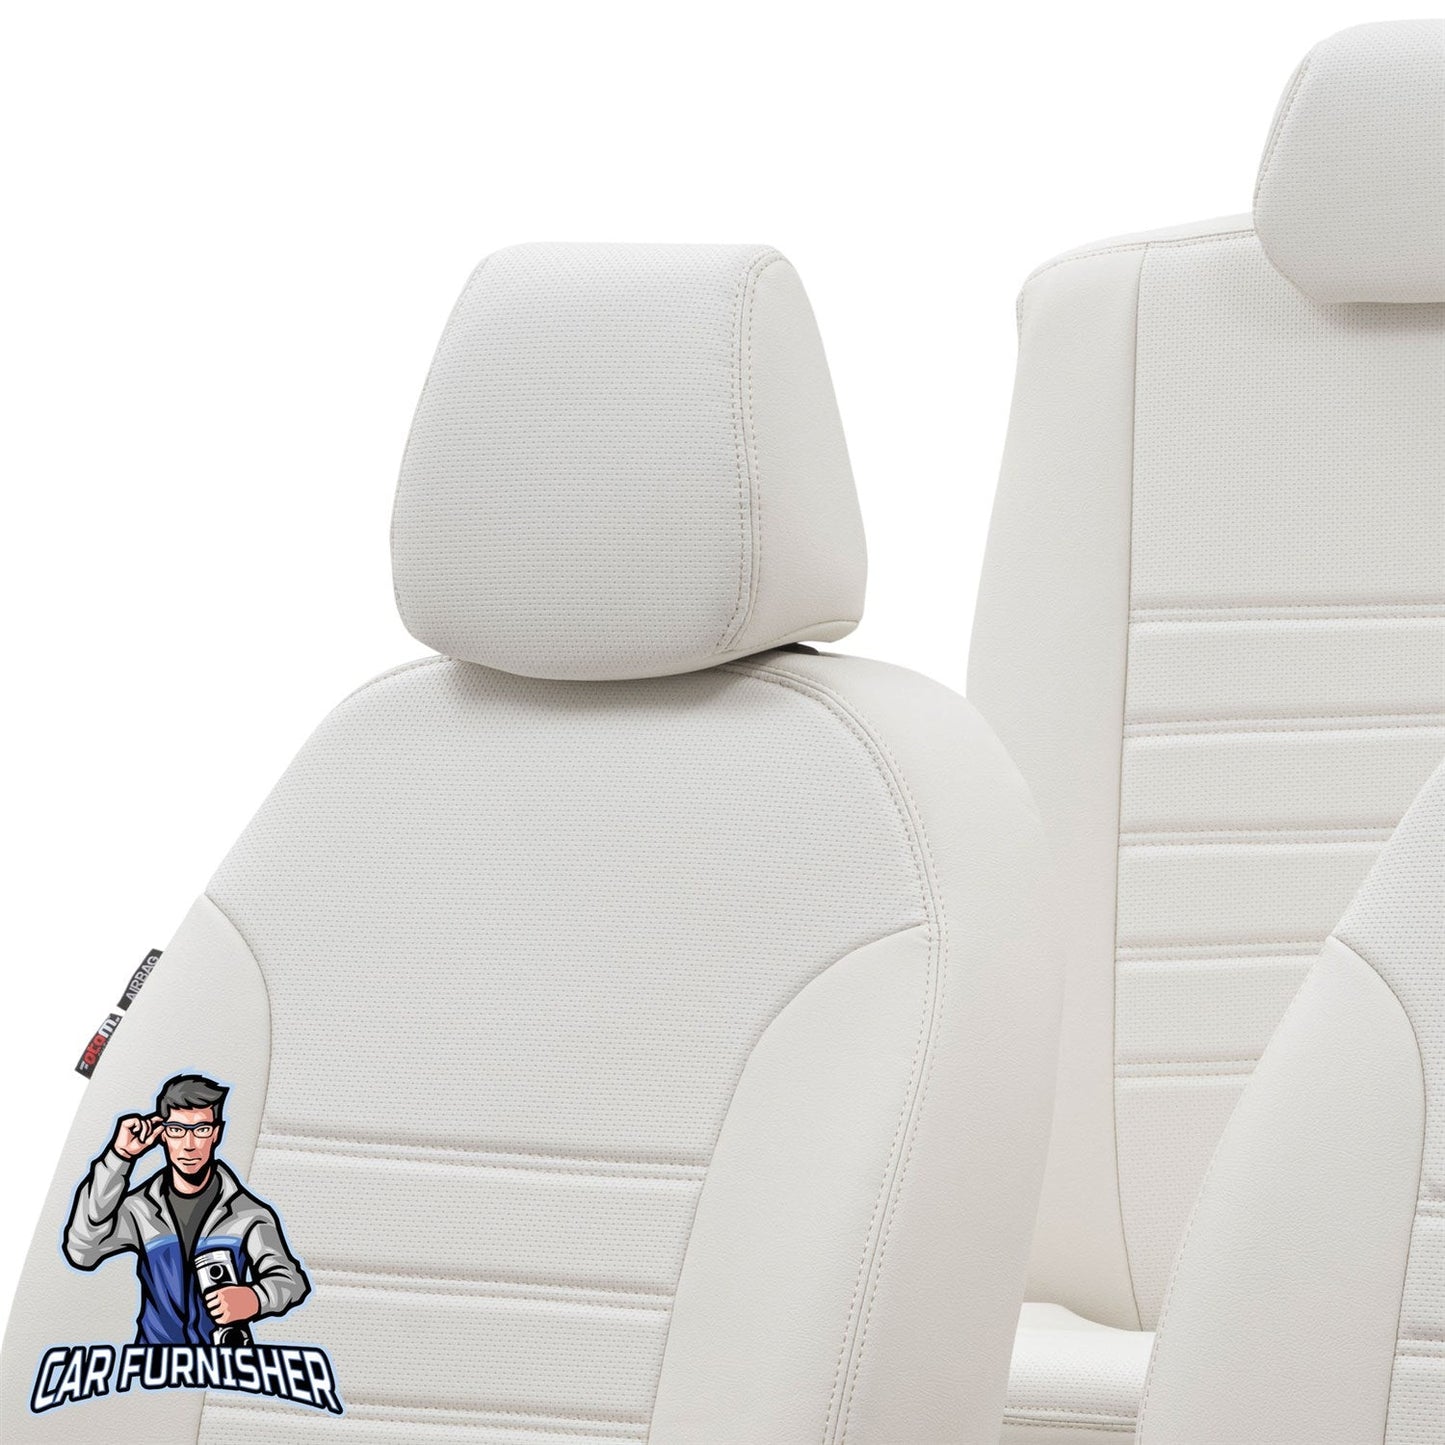 Kia Carens Seat Cover New York Leather Design Ivory Leather